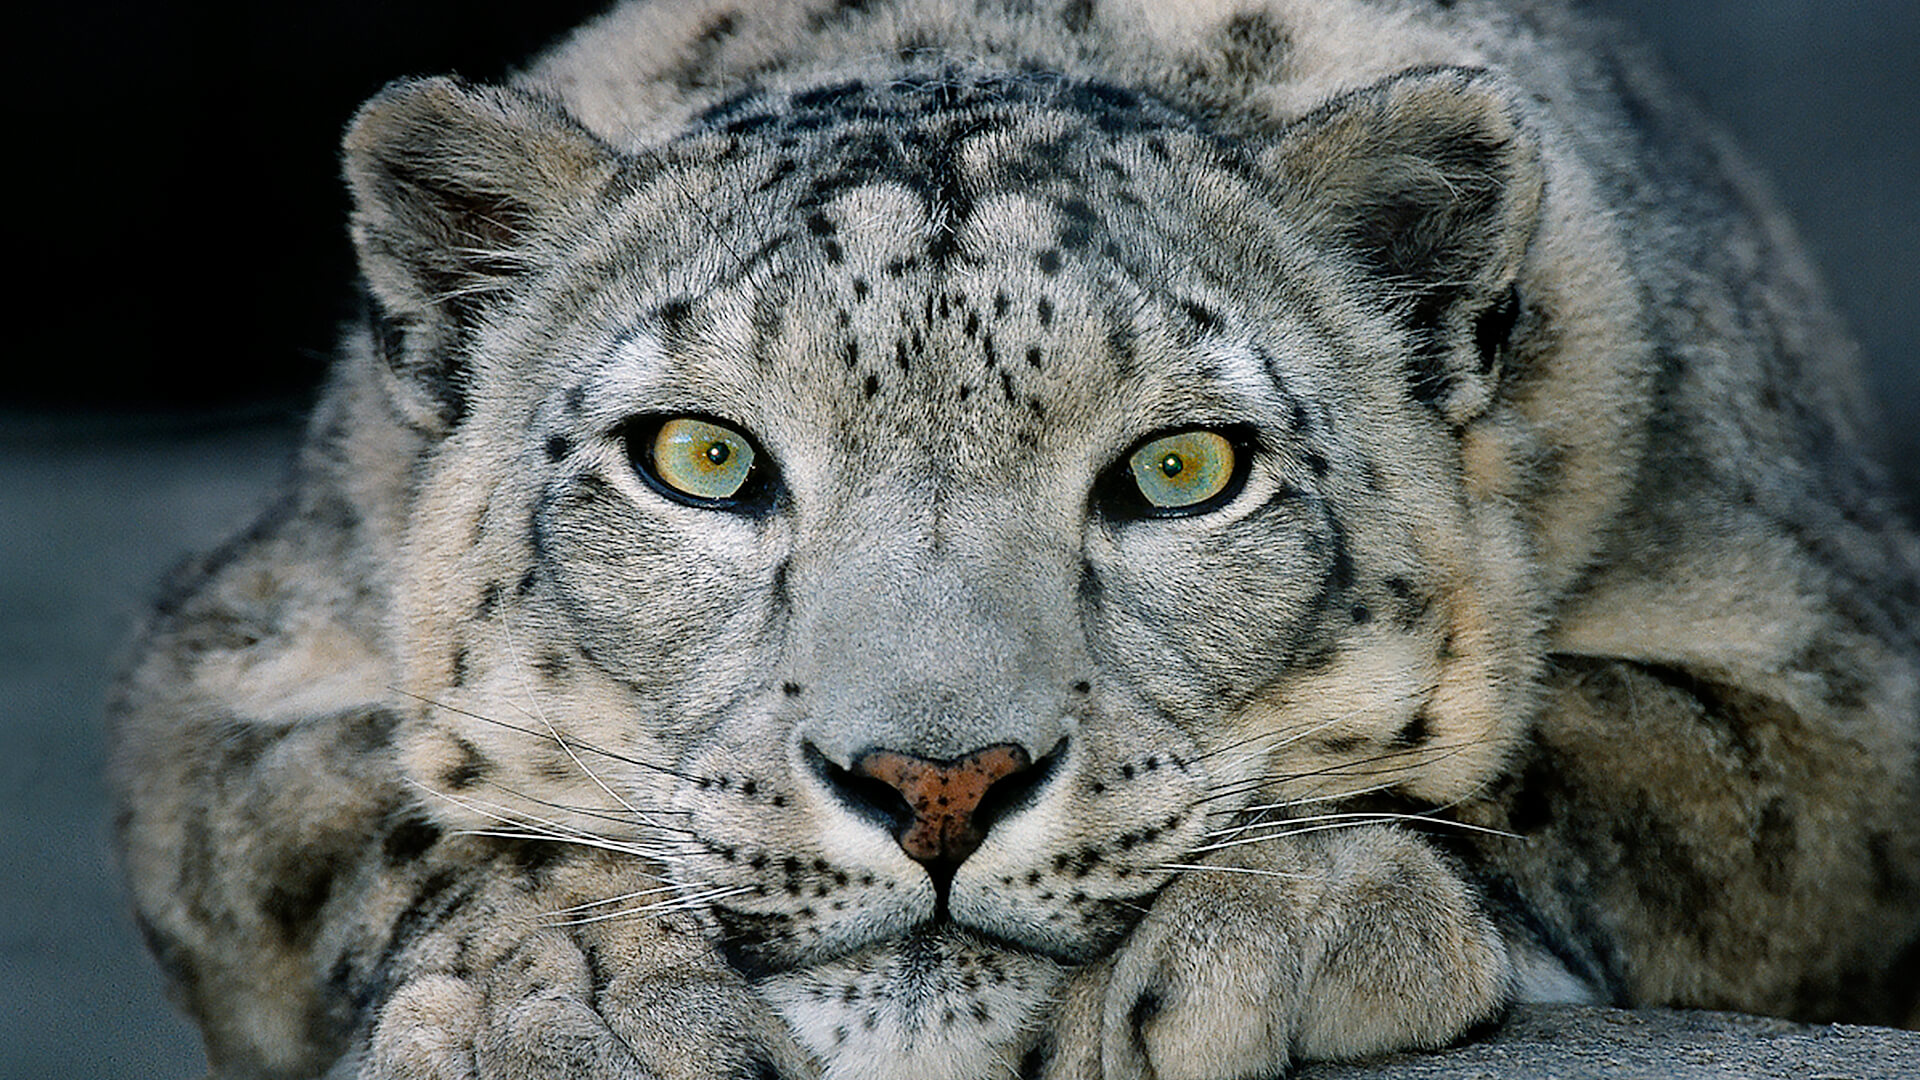 A snow leopard with aqua eyes stares at the camera